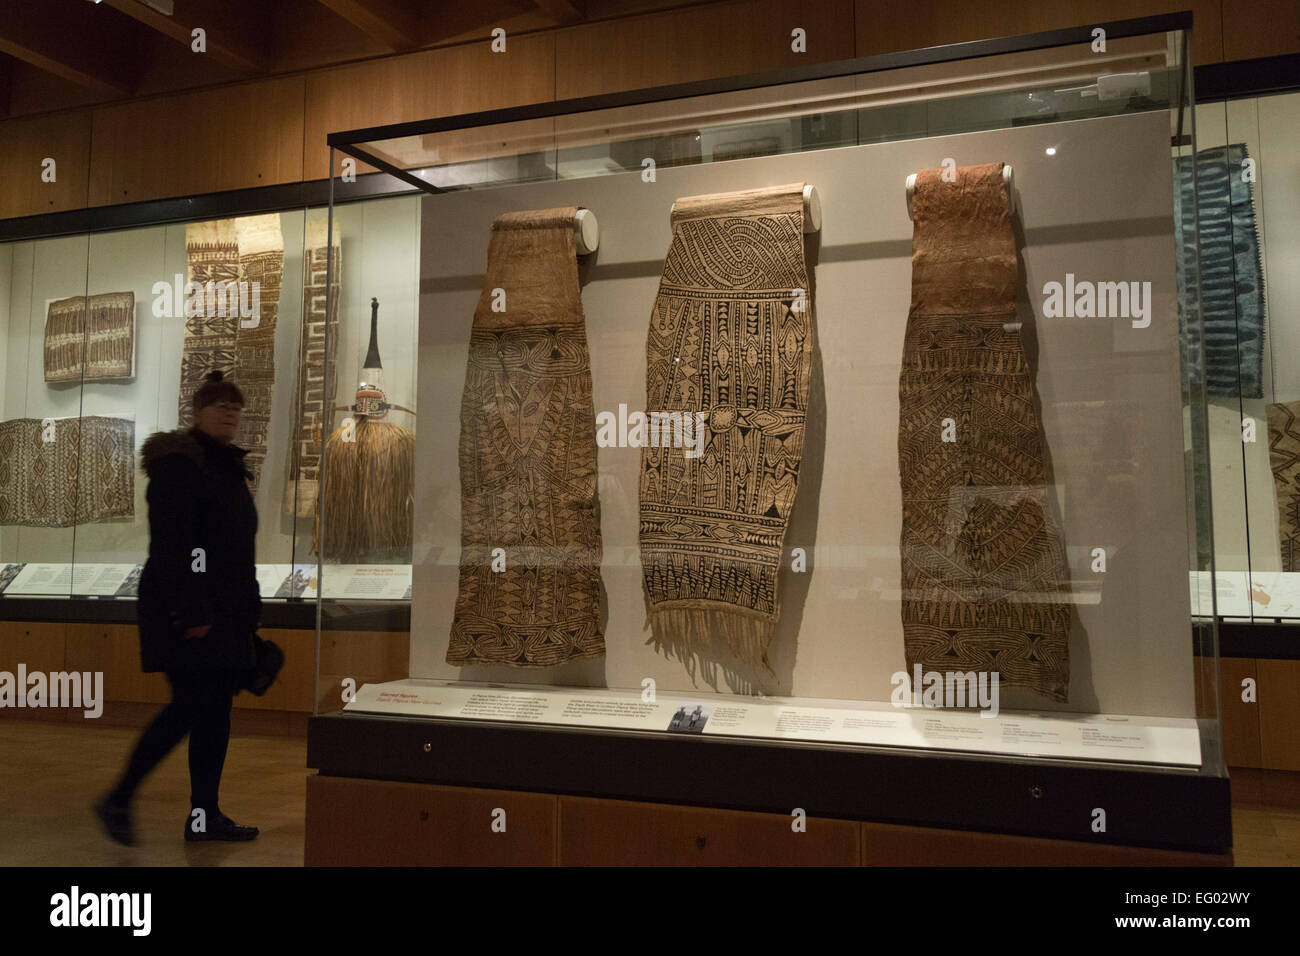 The exhibition 'Shifting Patterns: Pacific Barkcloth Clothing' opens at the British Museum and runs from 5 February to 16 August 2015. Curated by Natasha McKinney of the Oceania Section, seventy-seven objects made of barkcloth from the islands of the Pacific are displayed including garments, headdresses, masks and body ornaments. Stock Photo